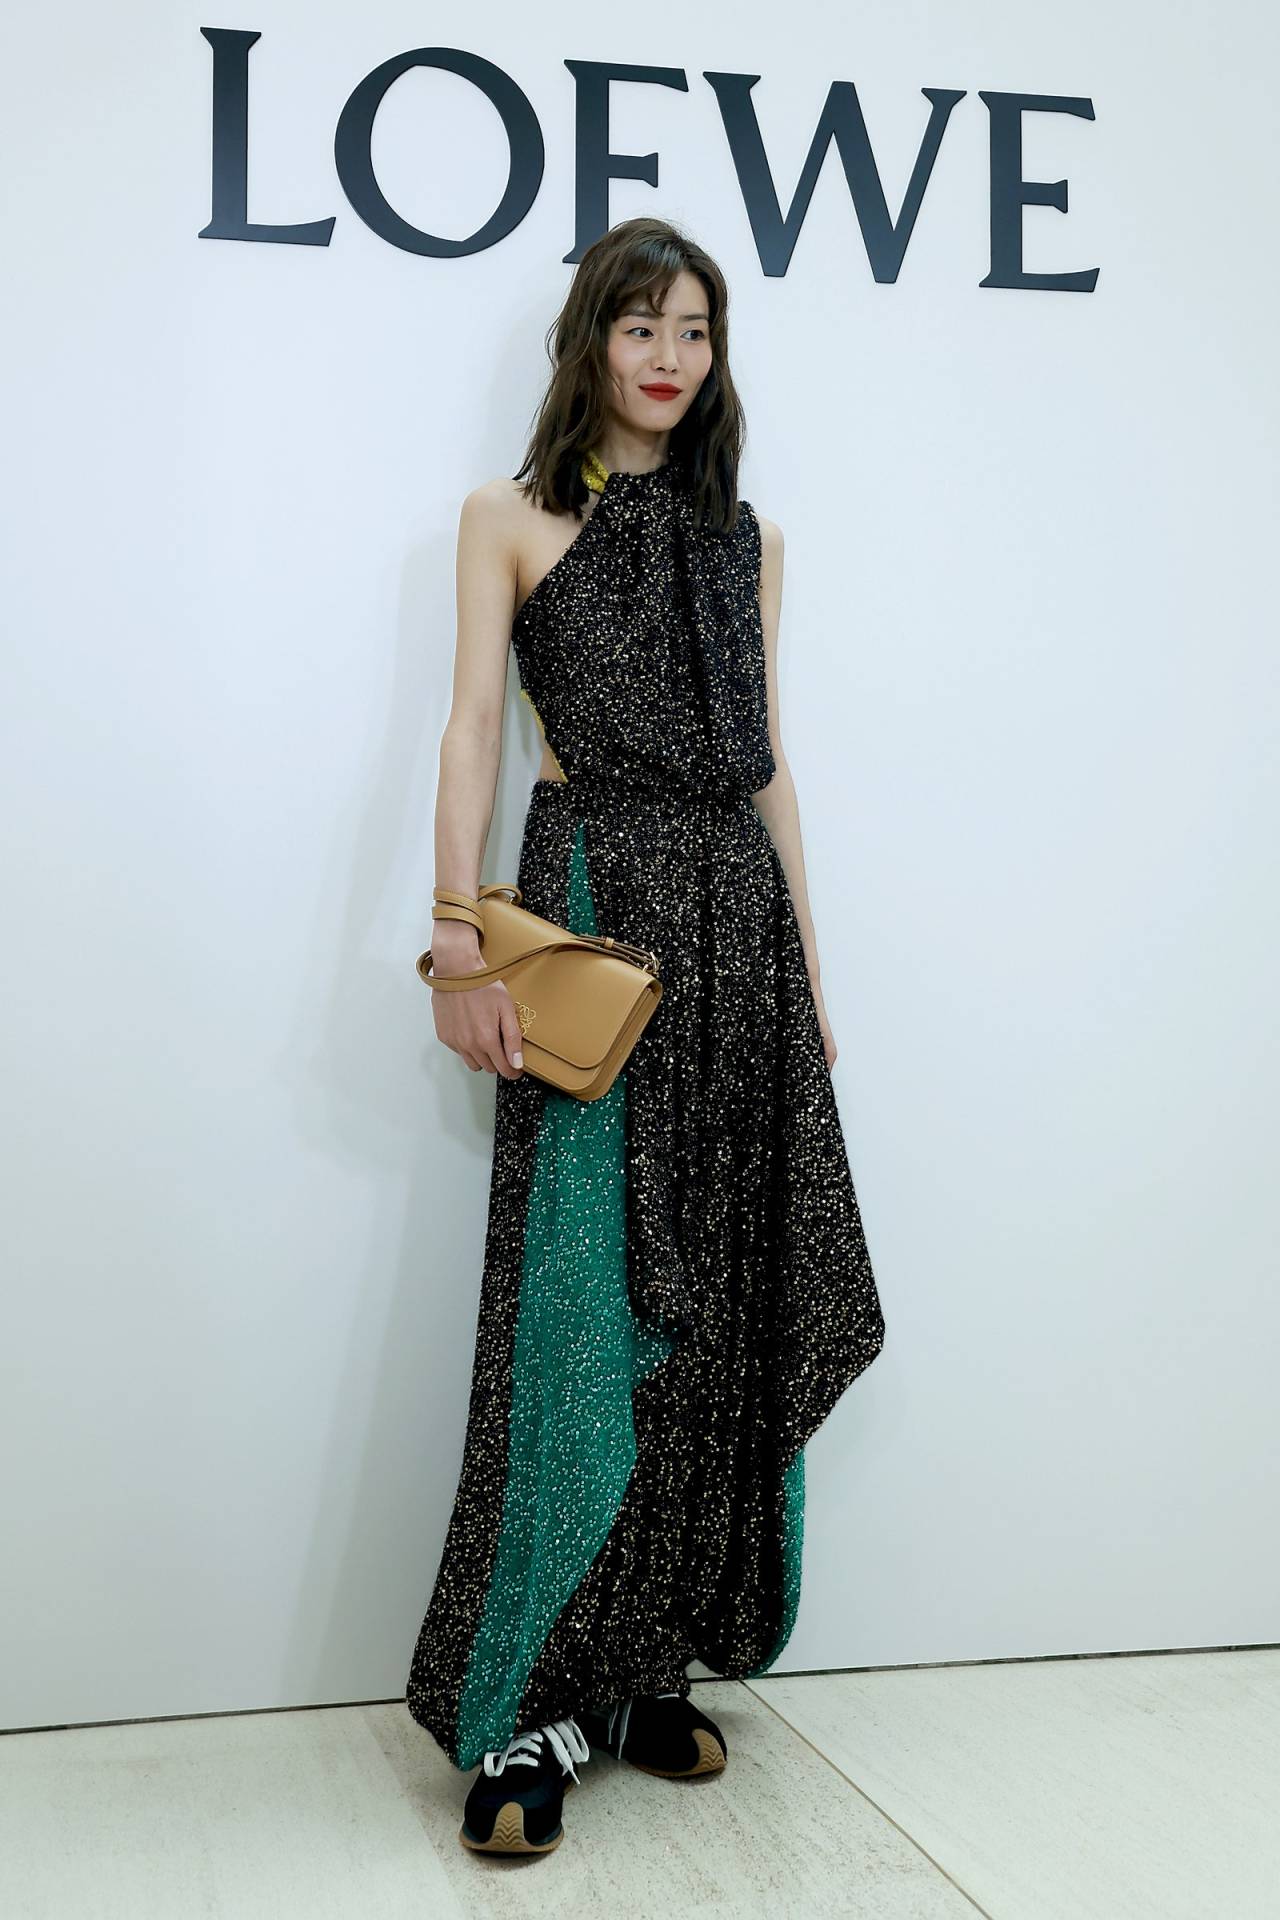 H o l l y w o o d  F a s h i o n — Liu Wen in Loewe at the Loewe Goya  event in